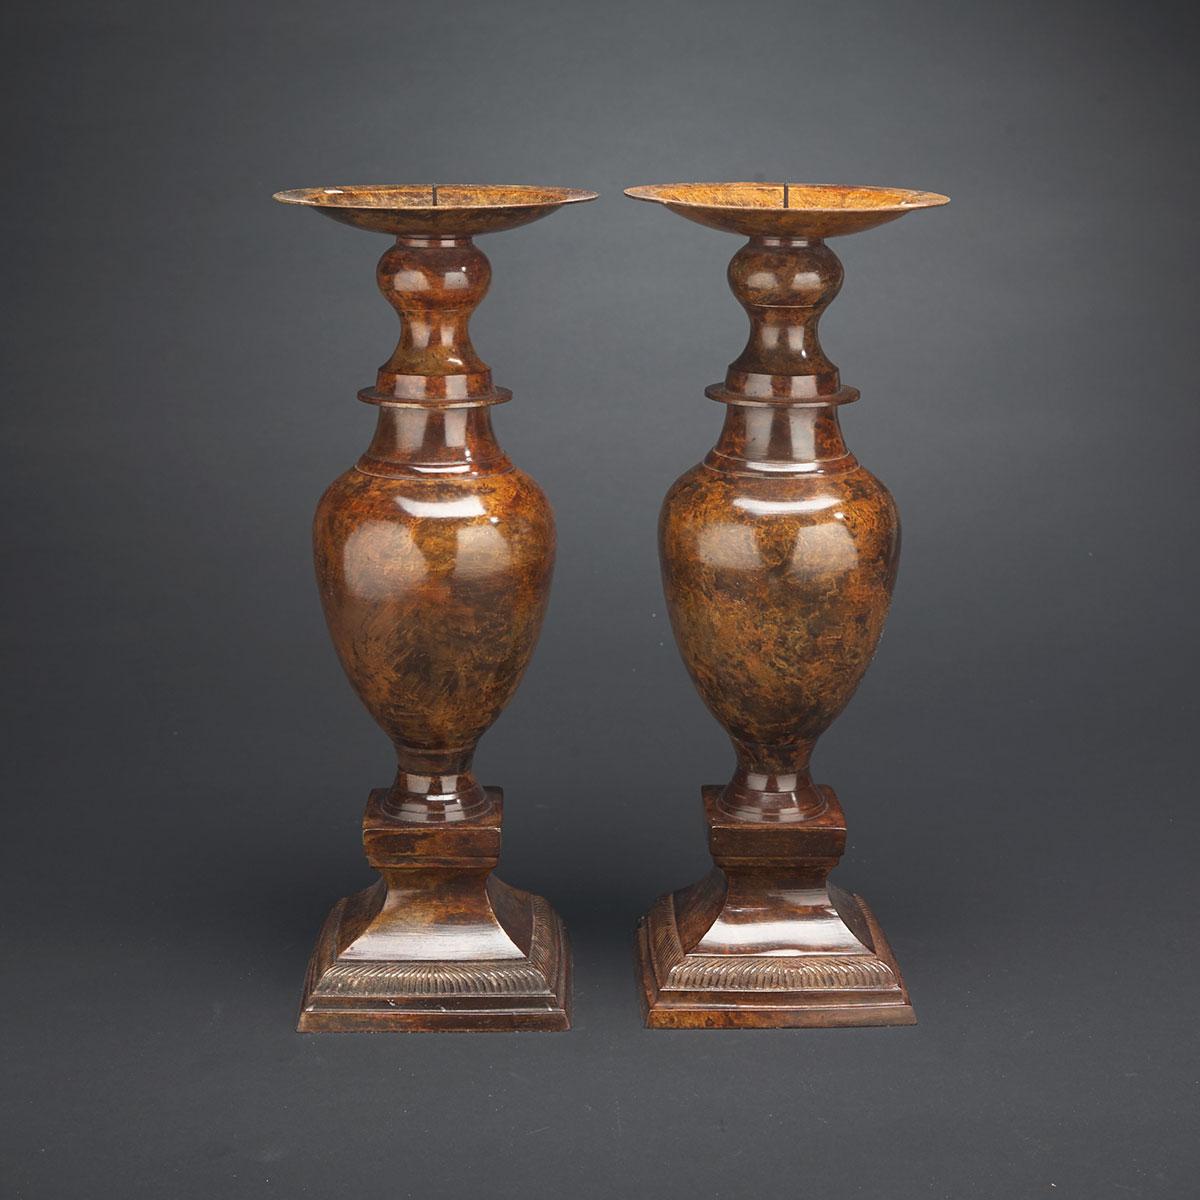 Pair of Contemporary Lacquered Metal Baluster Form Prickets, 20th century